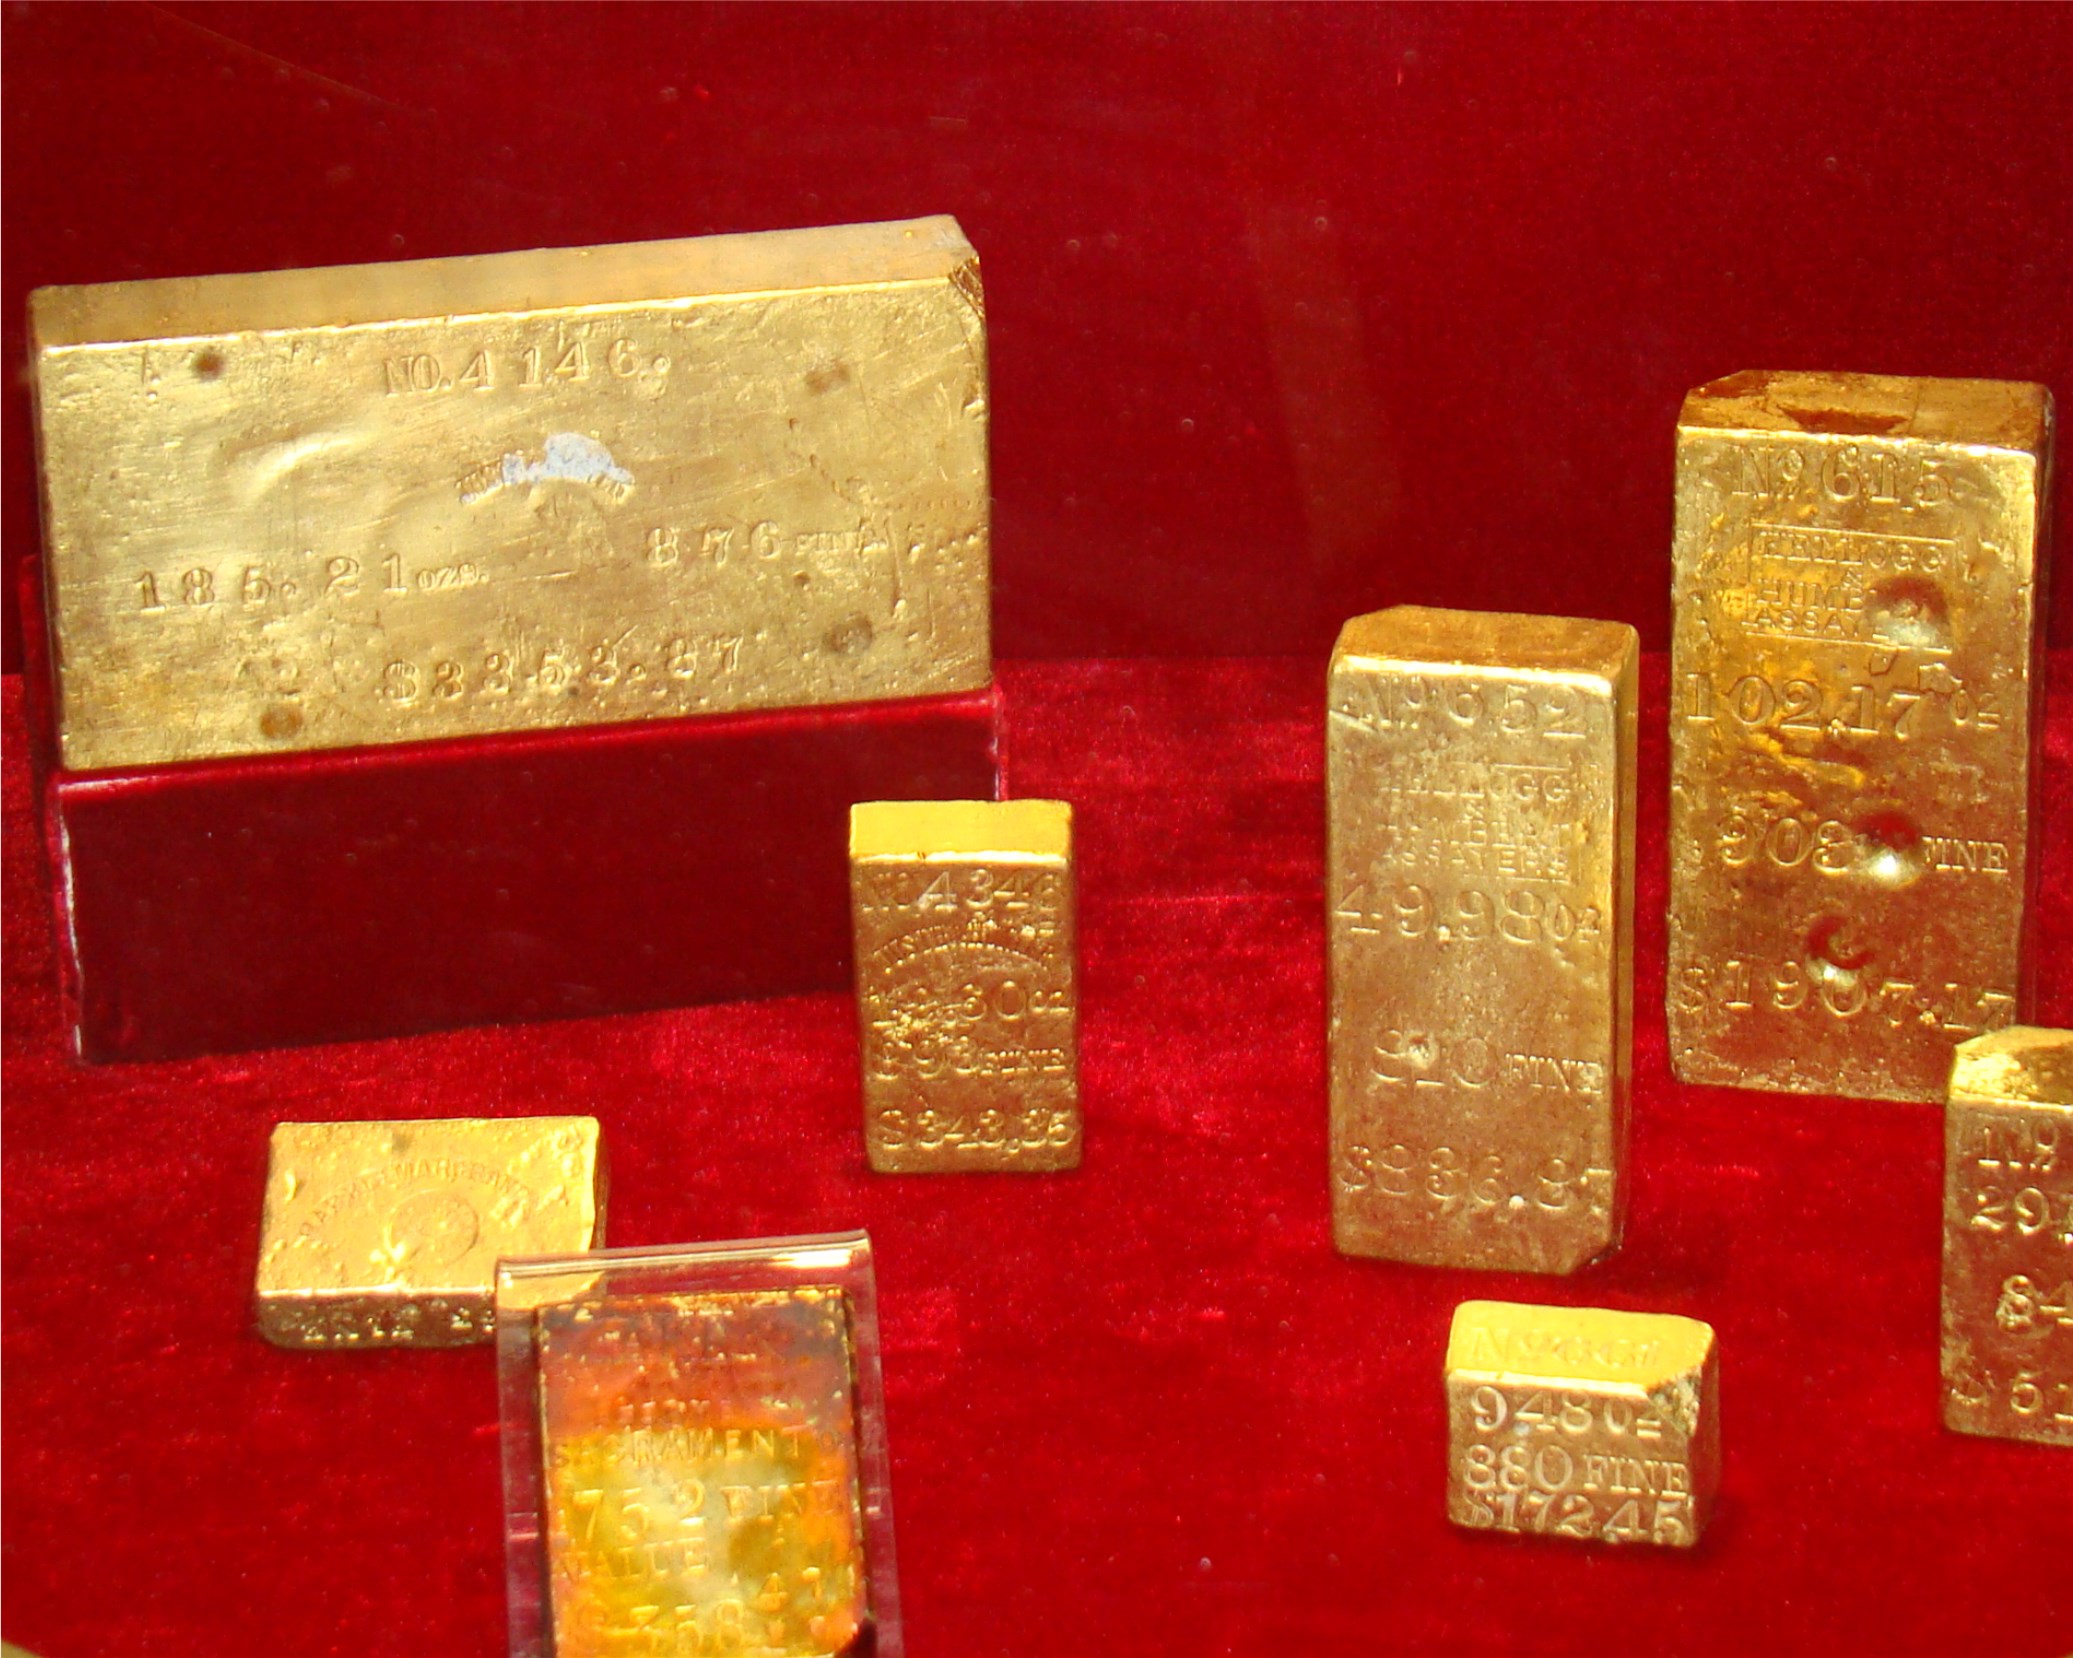 More than $10 million of recovered Gold Rush-era sunken treasure from the fabled "Ship of Gold," the SS Central America, will be displayed at the September 2013 Long Beach Expo.